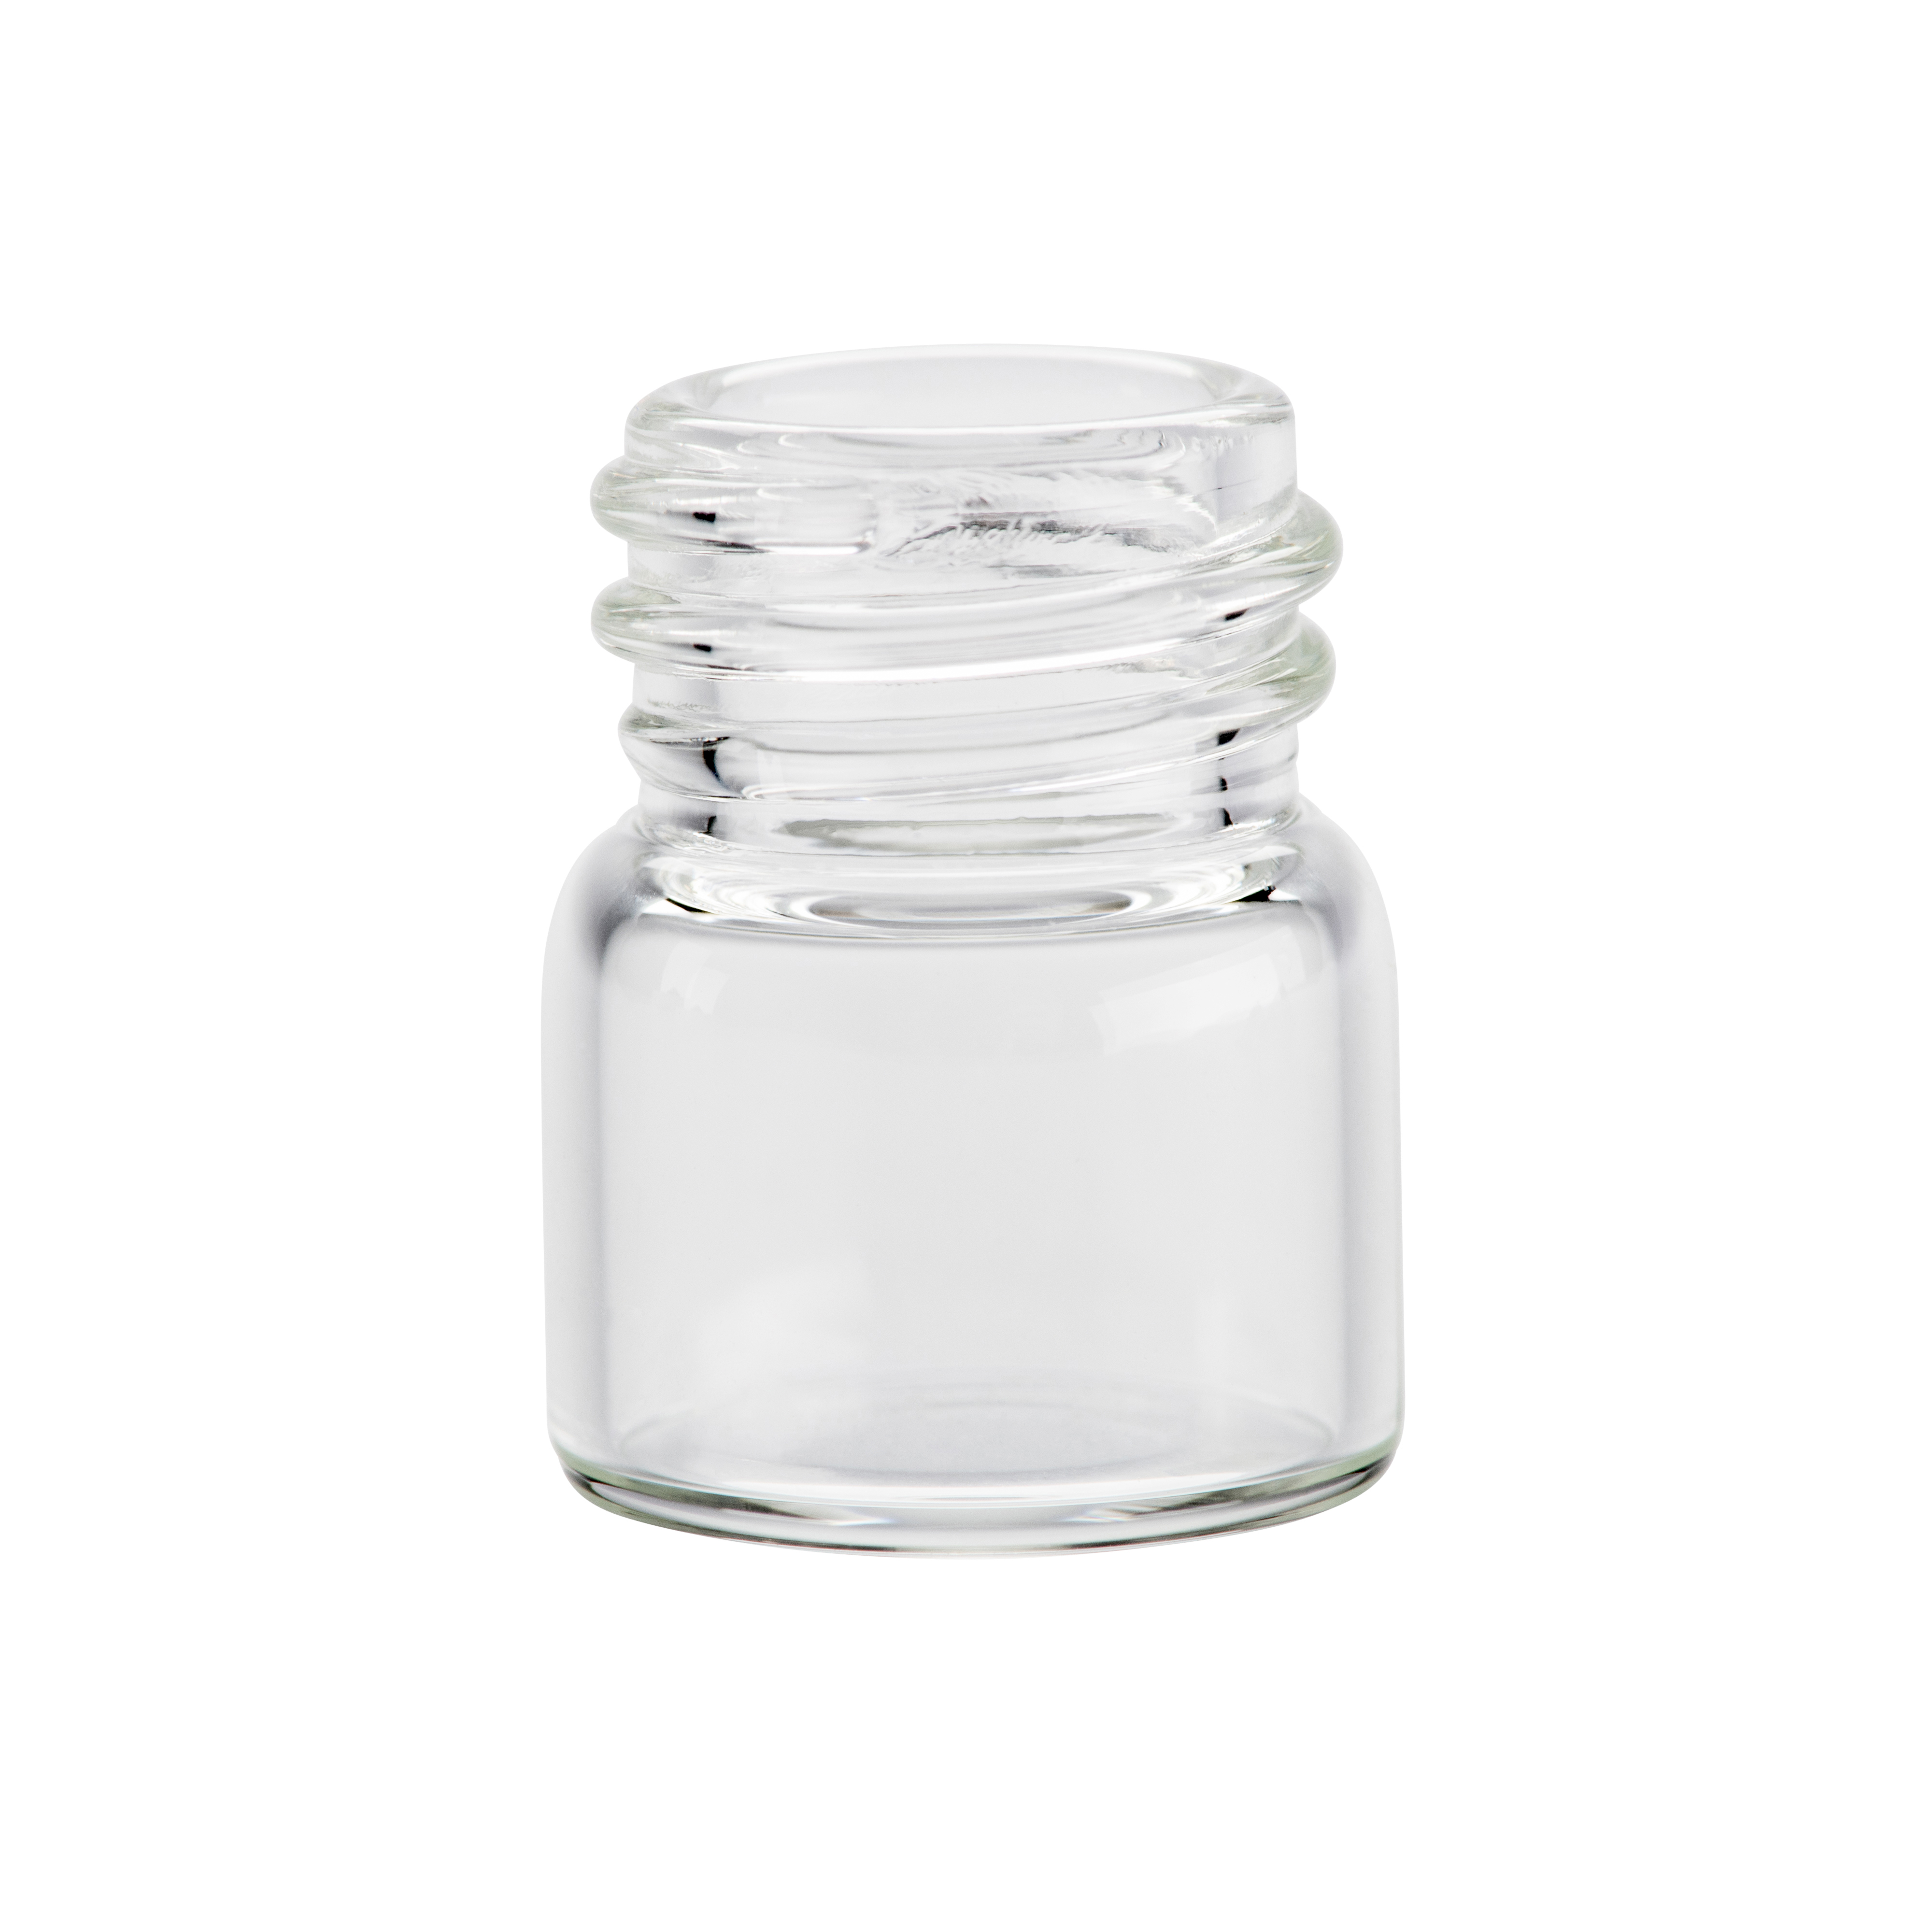 Small glass container for food storage